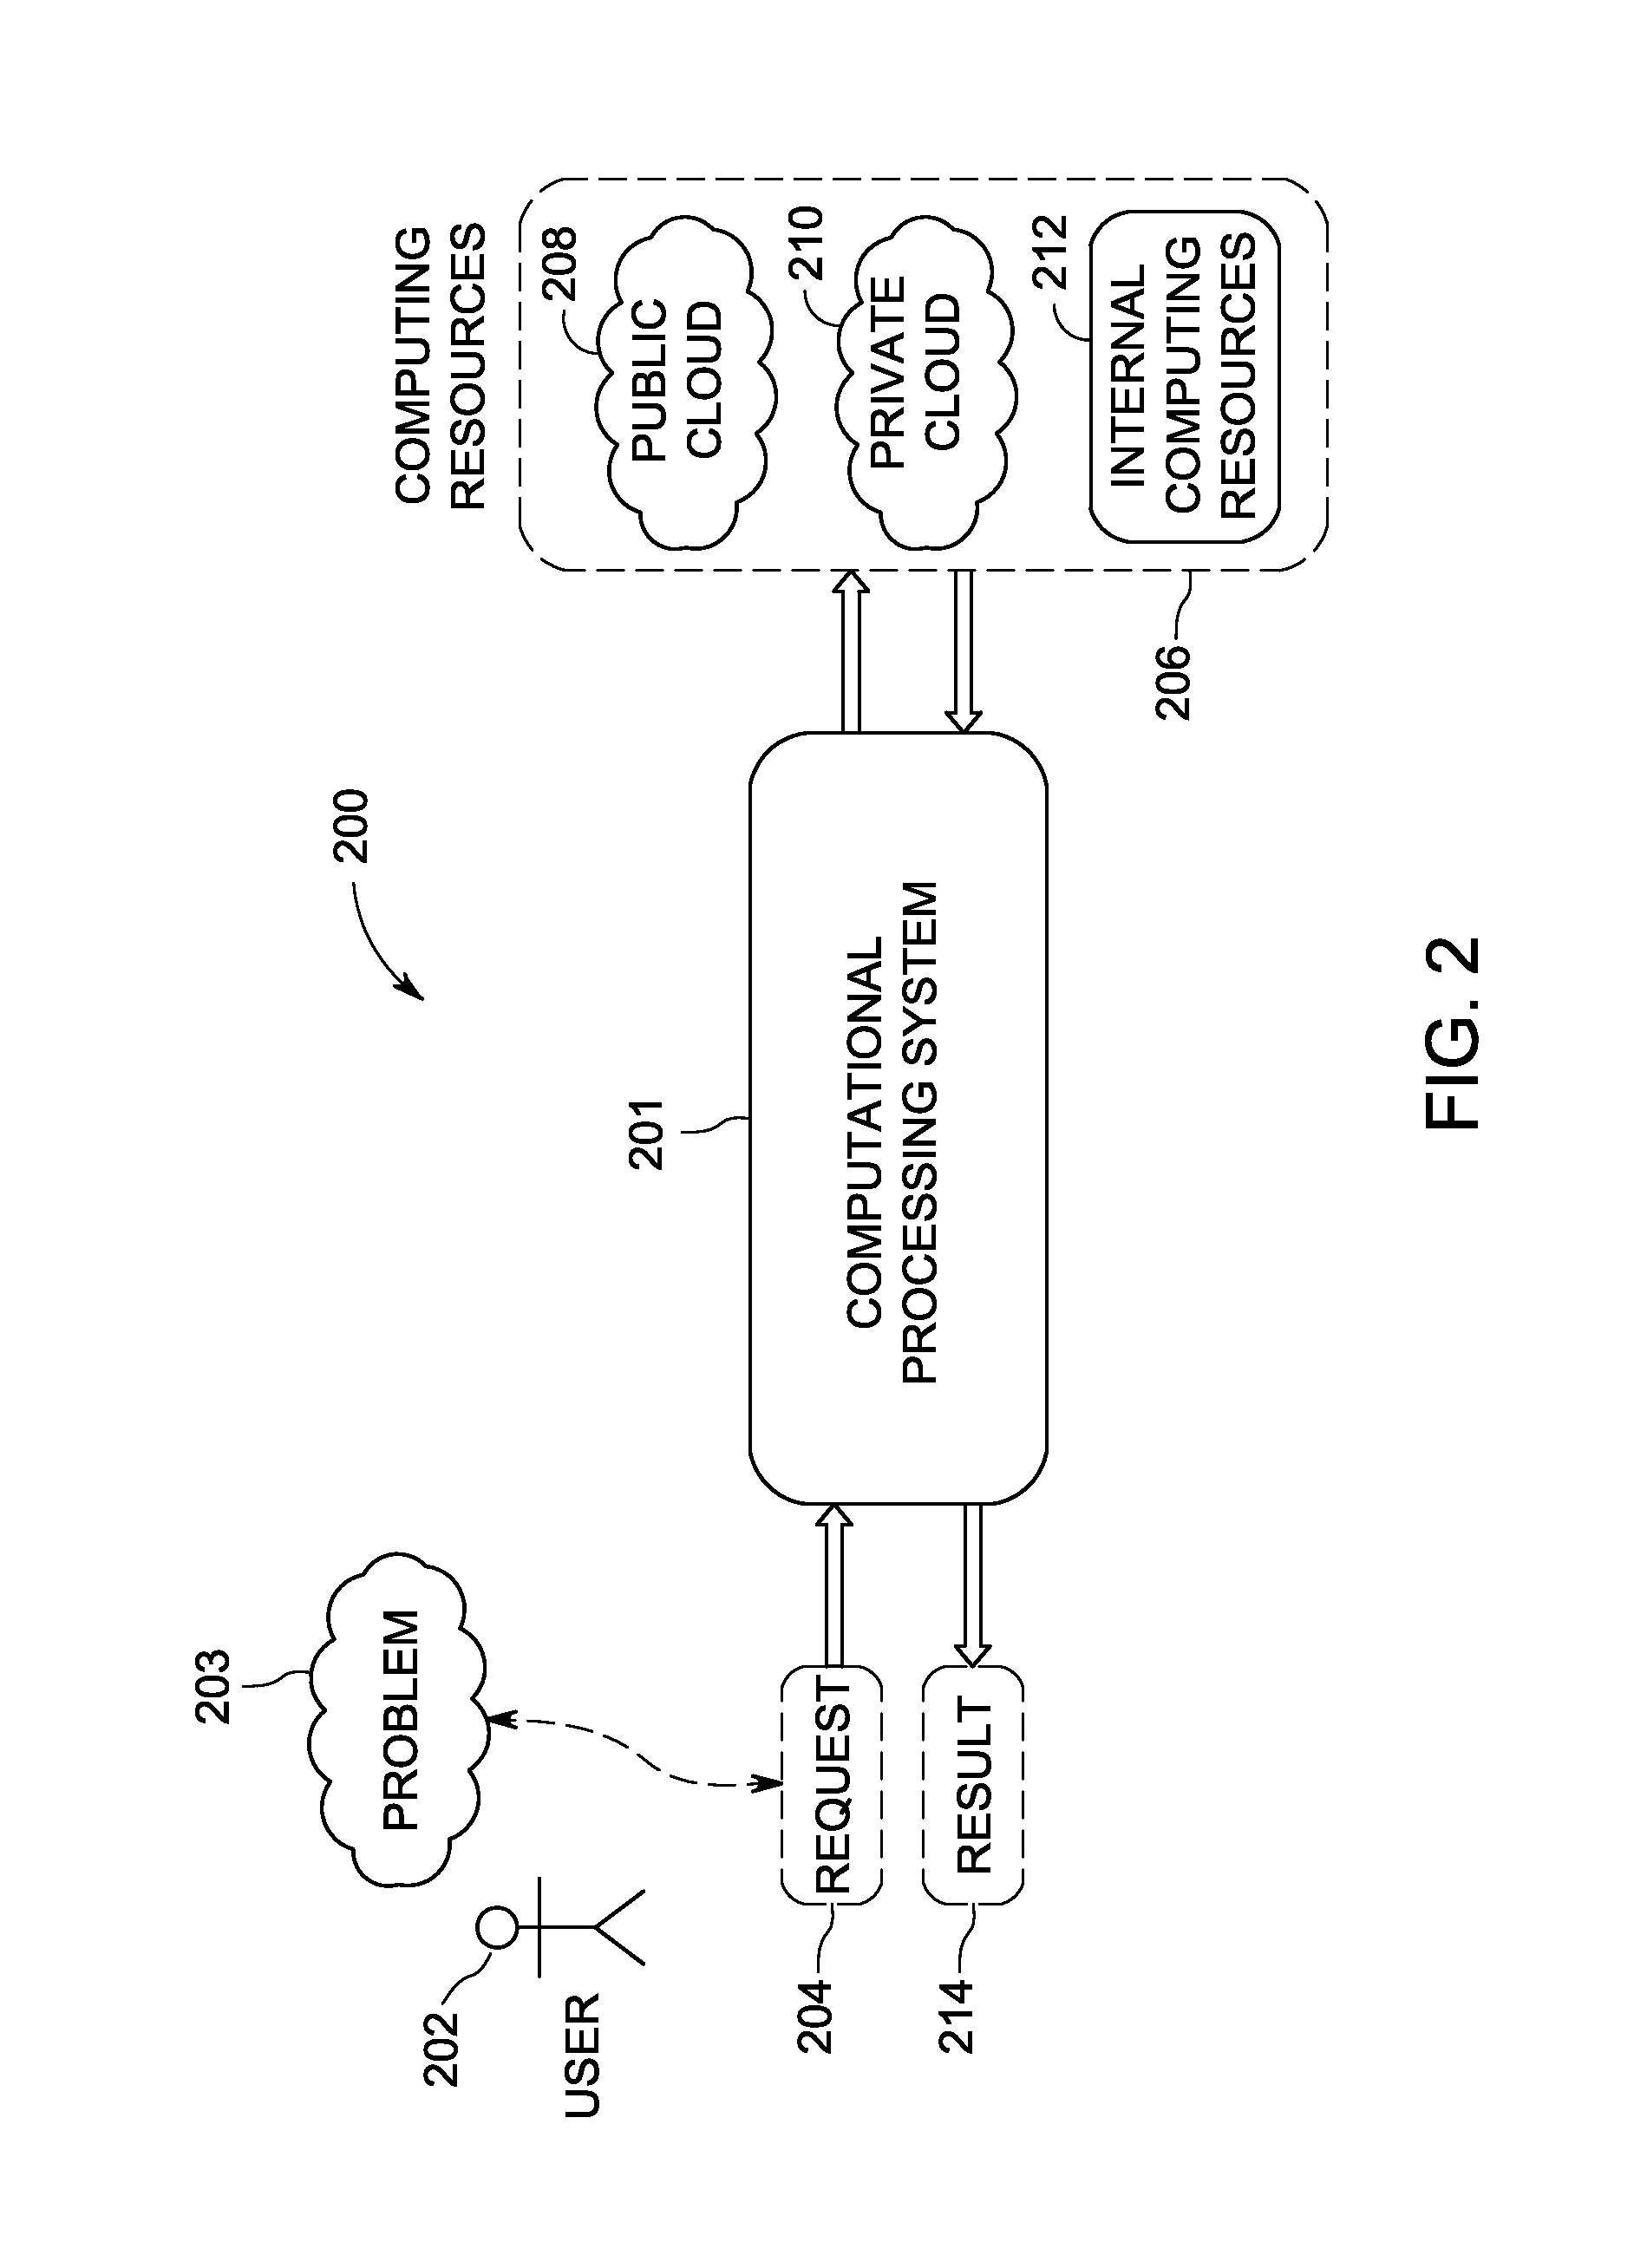 System and method for distributed computing using automated provisoning of heterogeneous computing resources